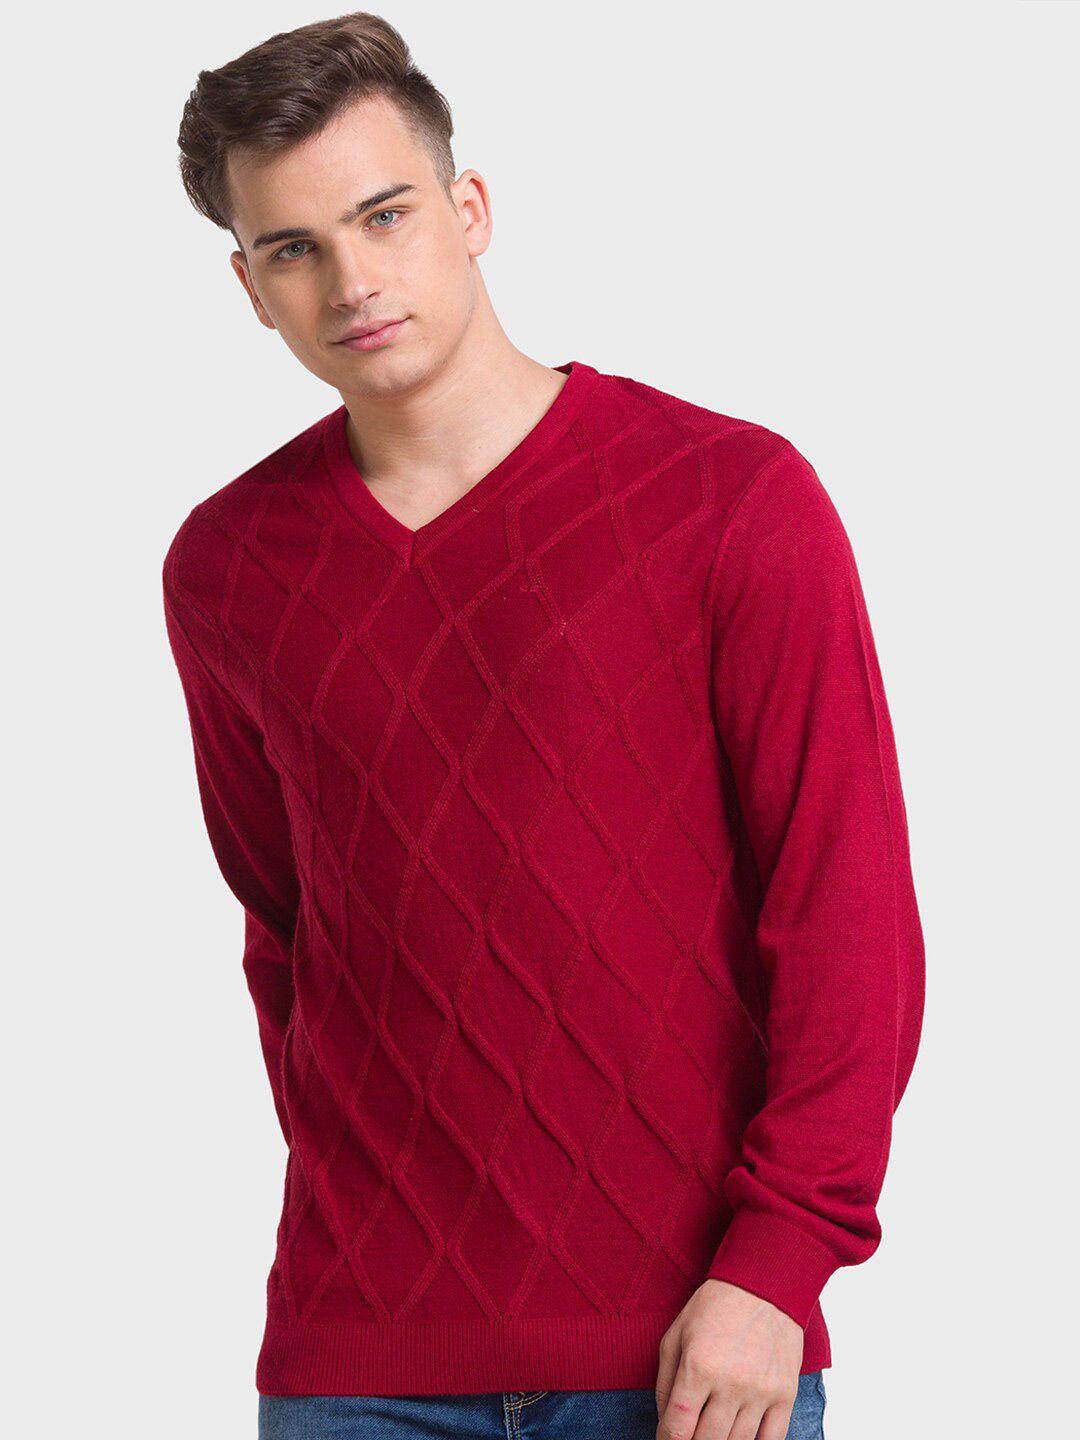 colorplus geometric self design v-neck long sleeves tailored fit pullover sweater